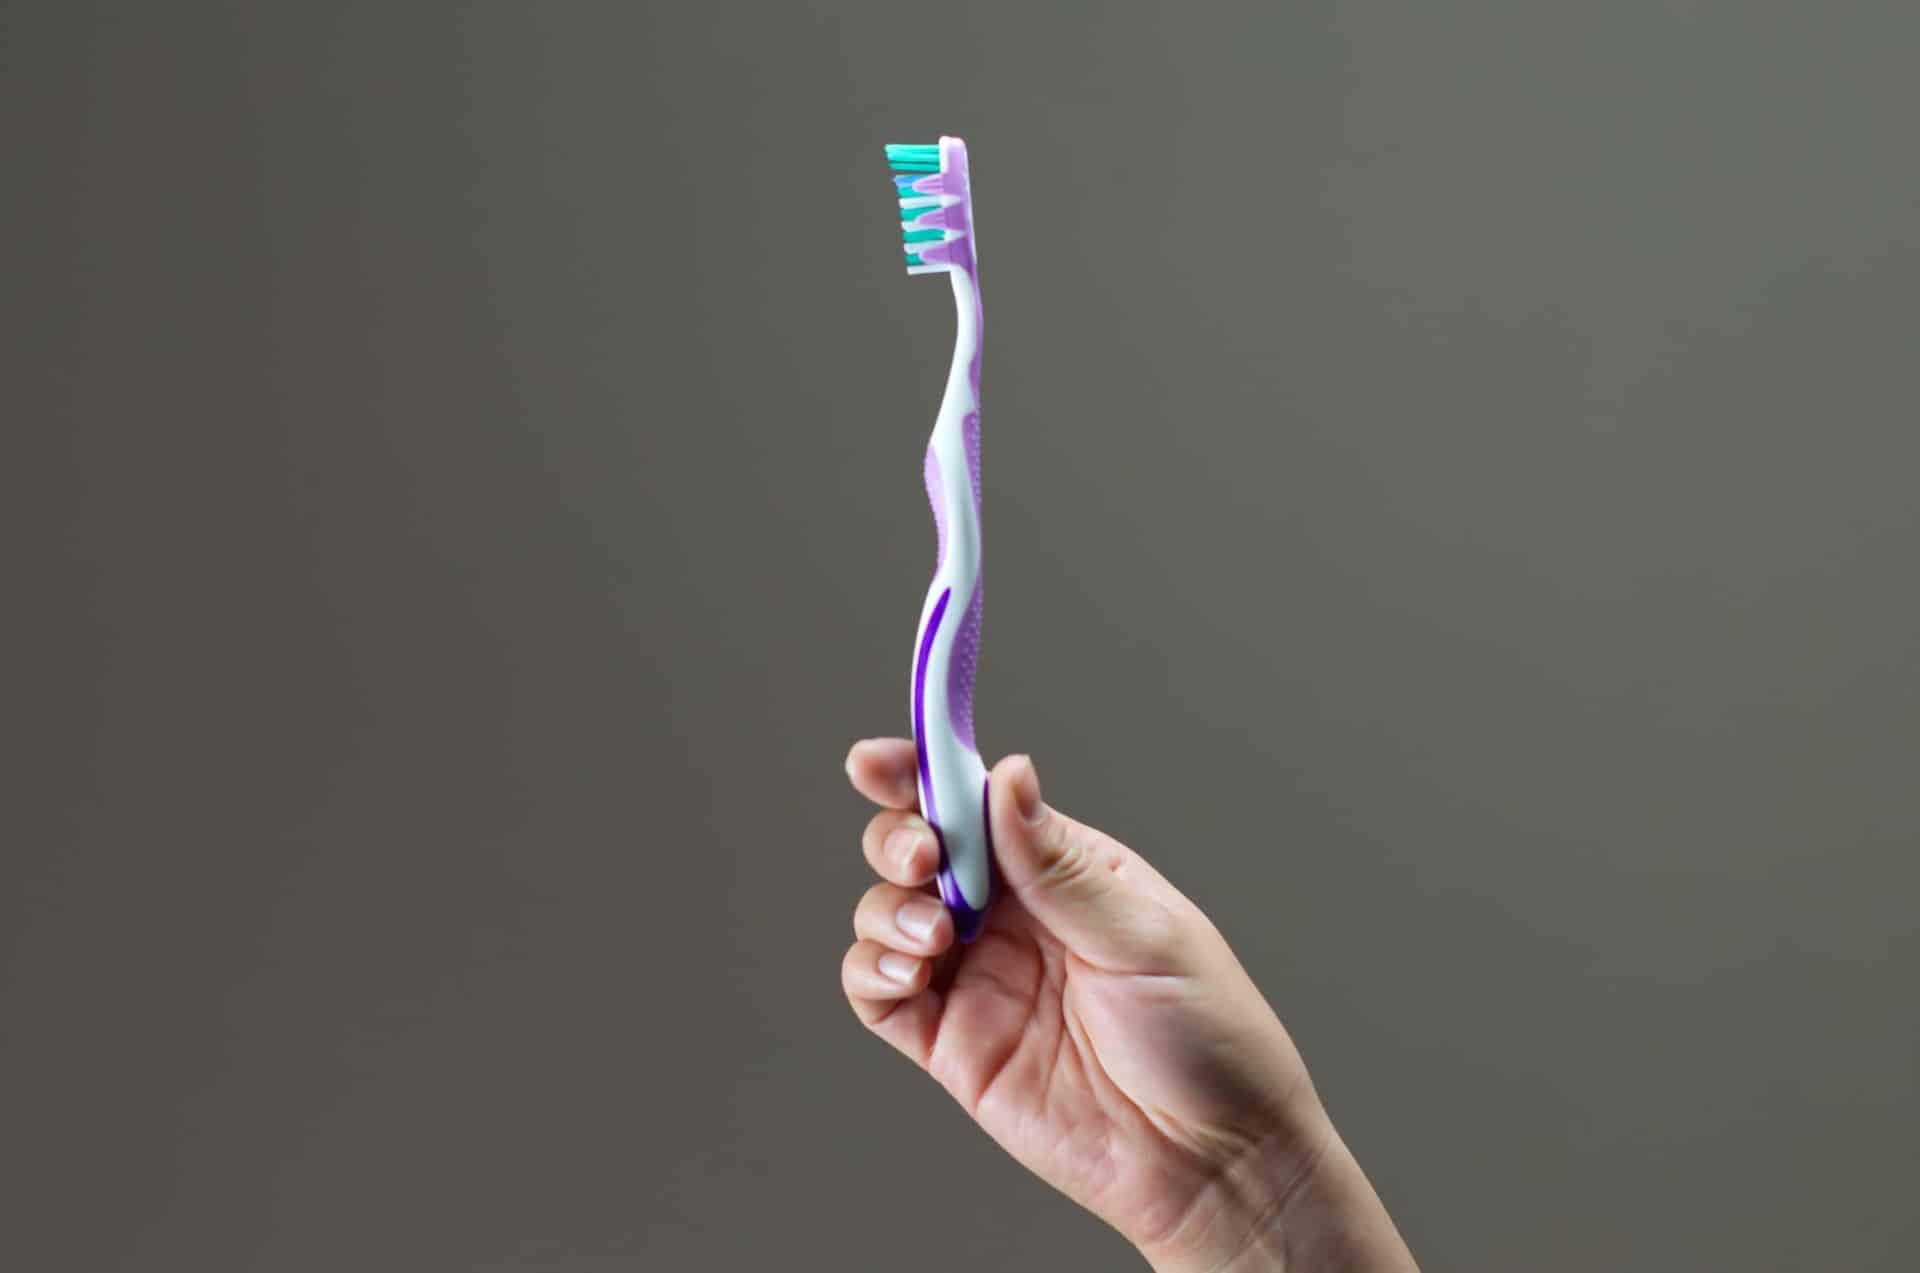 brushing teeth too hard - hand holding a toothbrush upright